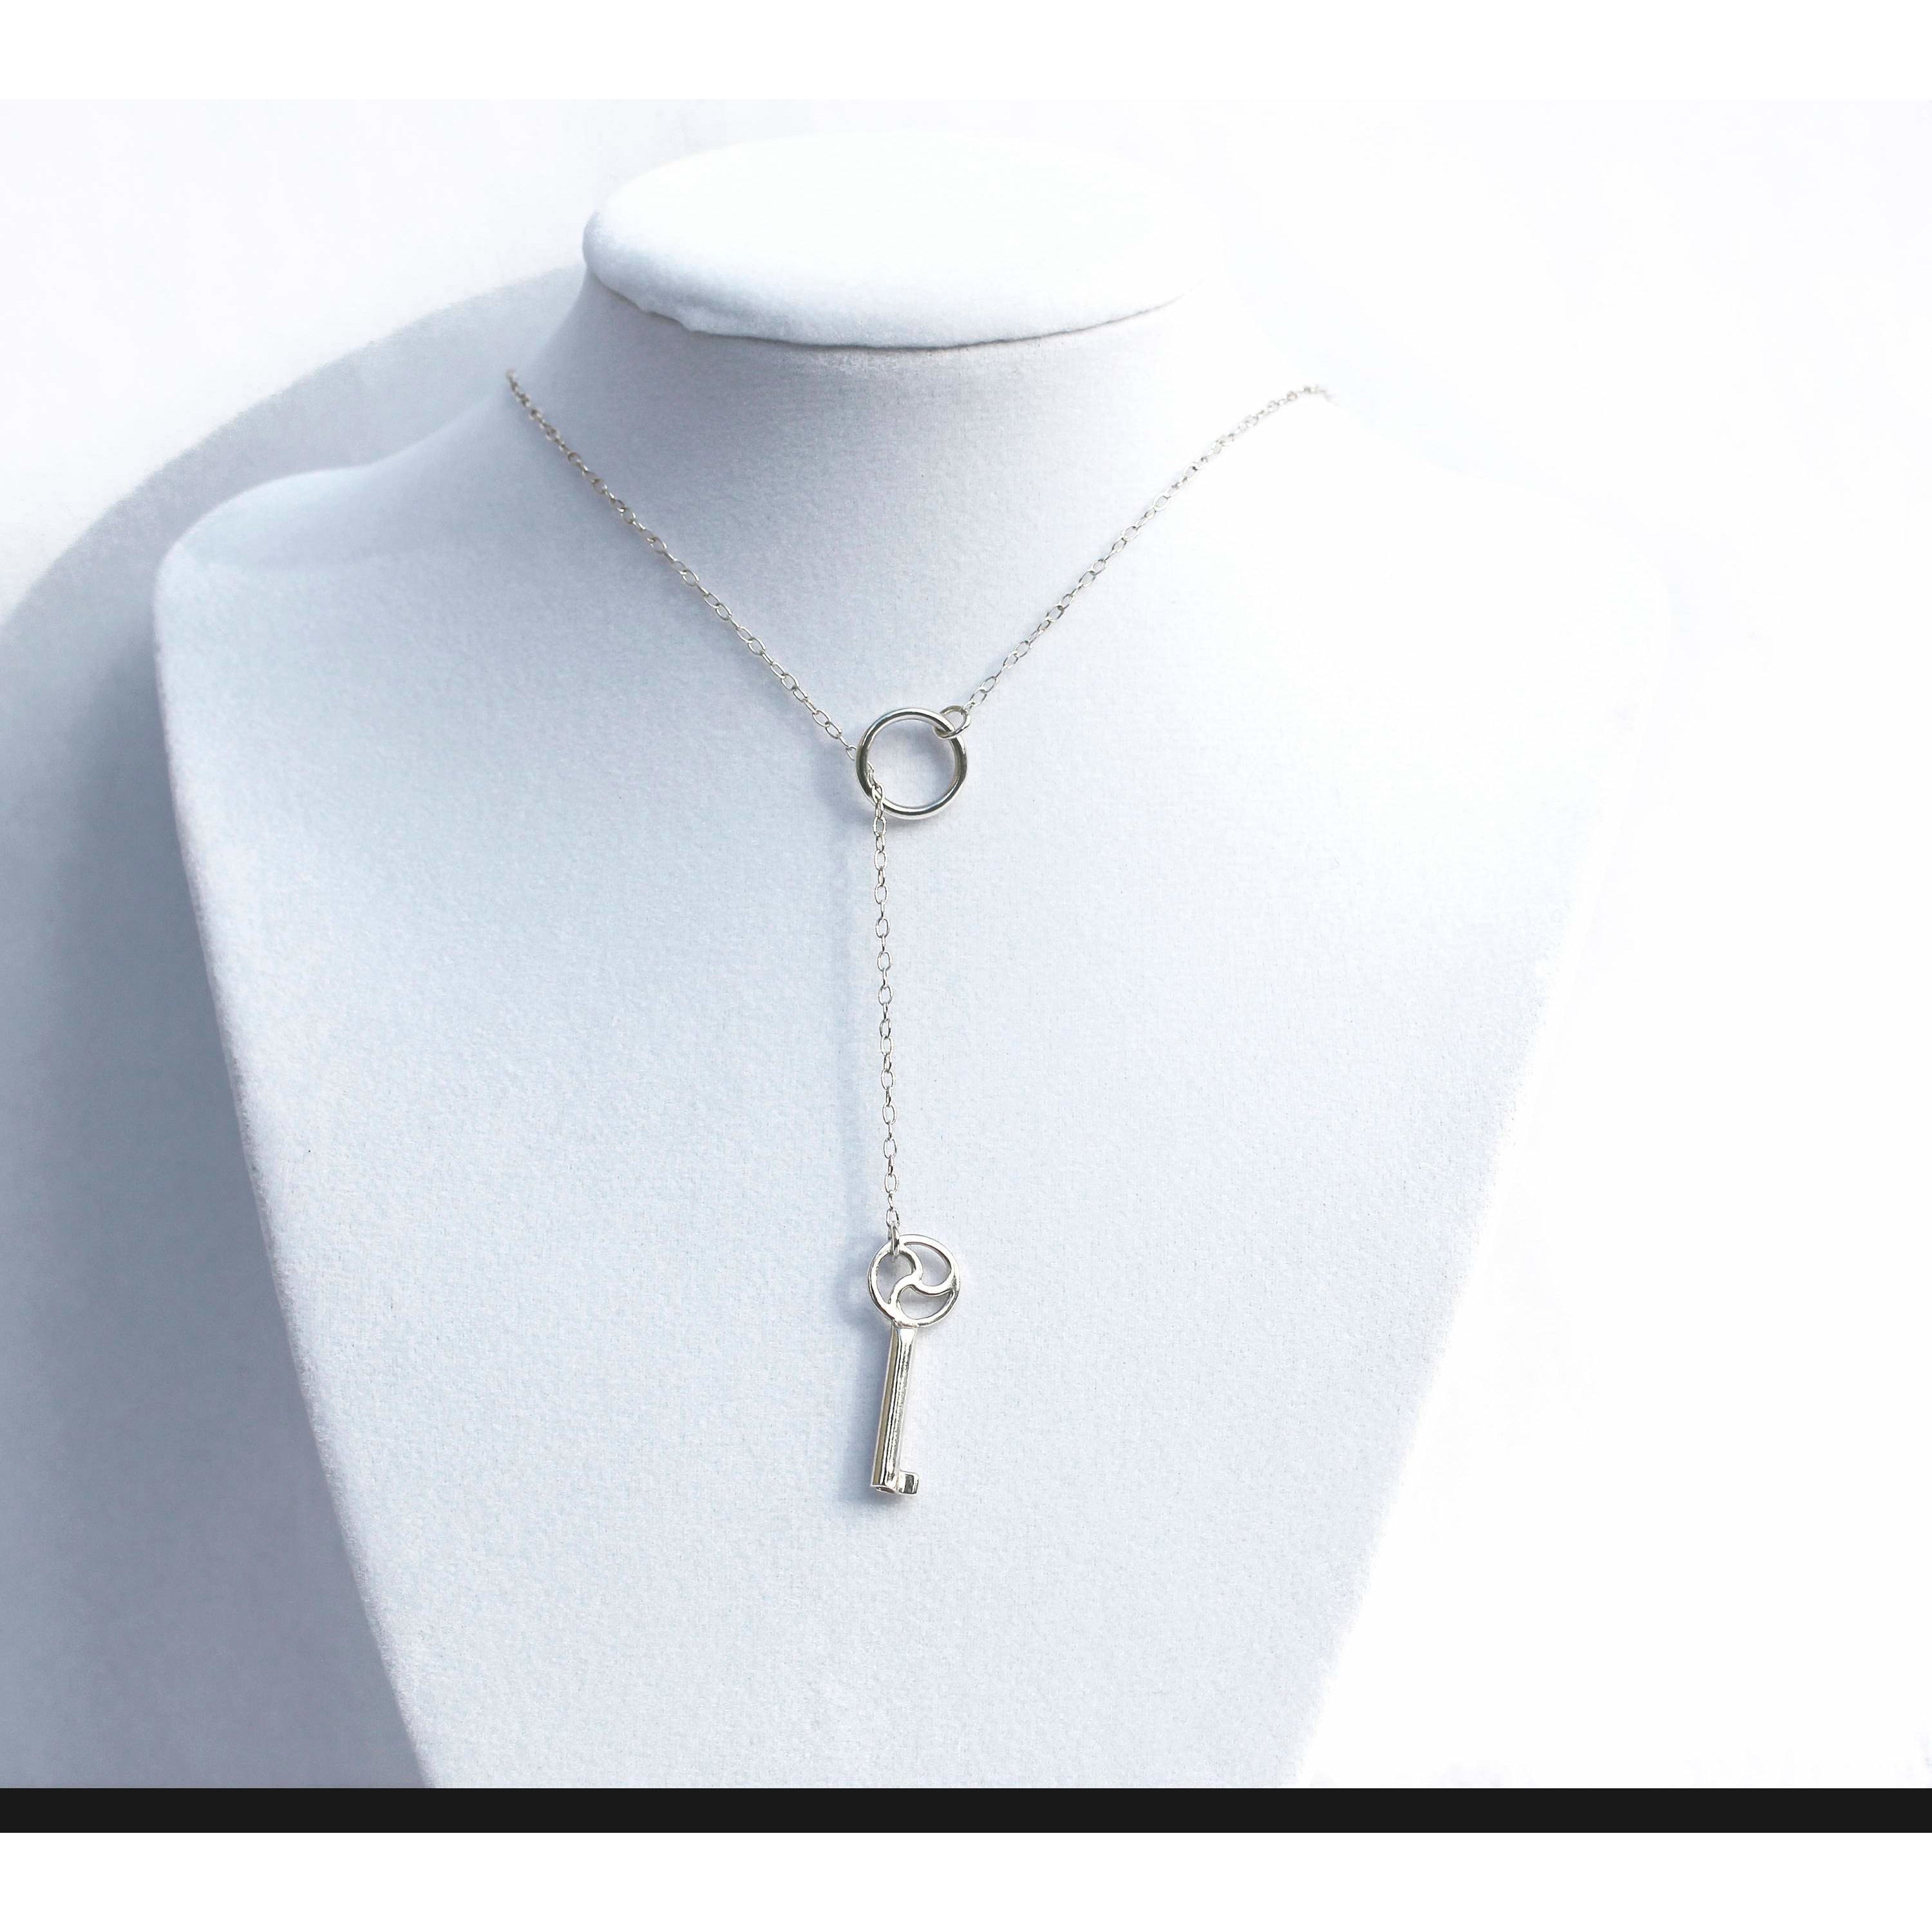 Sterling Silver, Lariat BDSM Triskele,  Working Key, BDSM Discreet Symbol, Handmade , boxed and gift wrapped